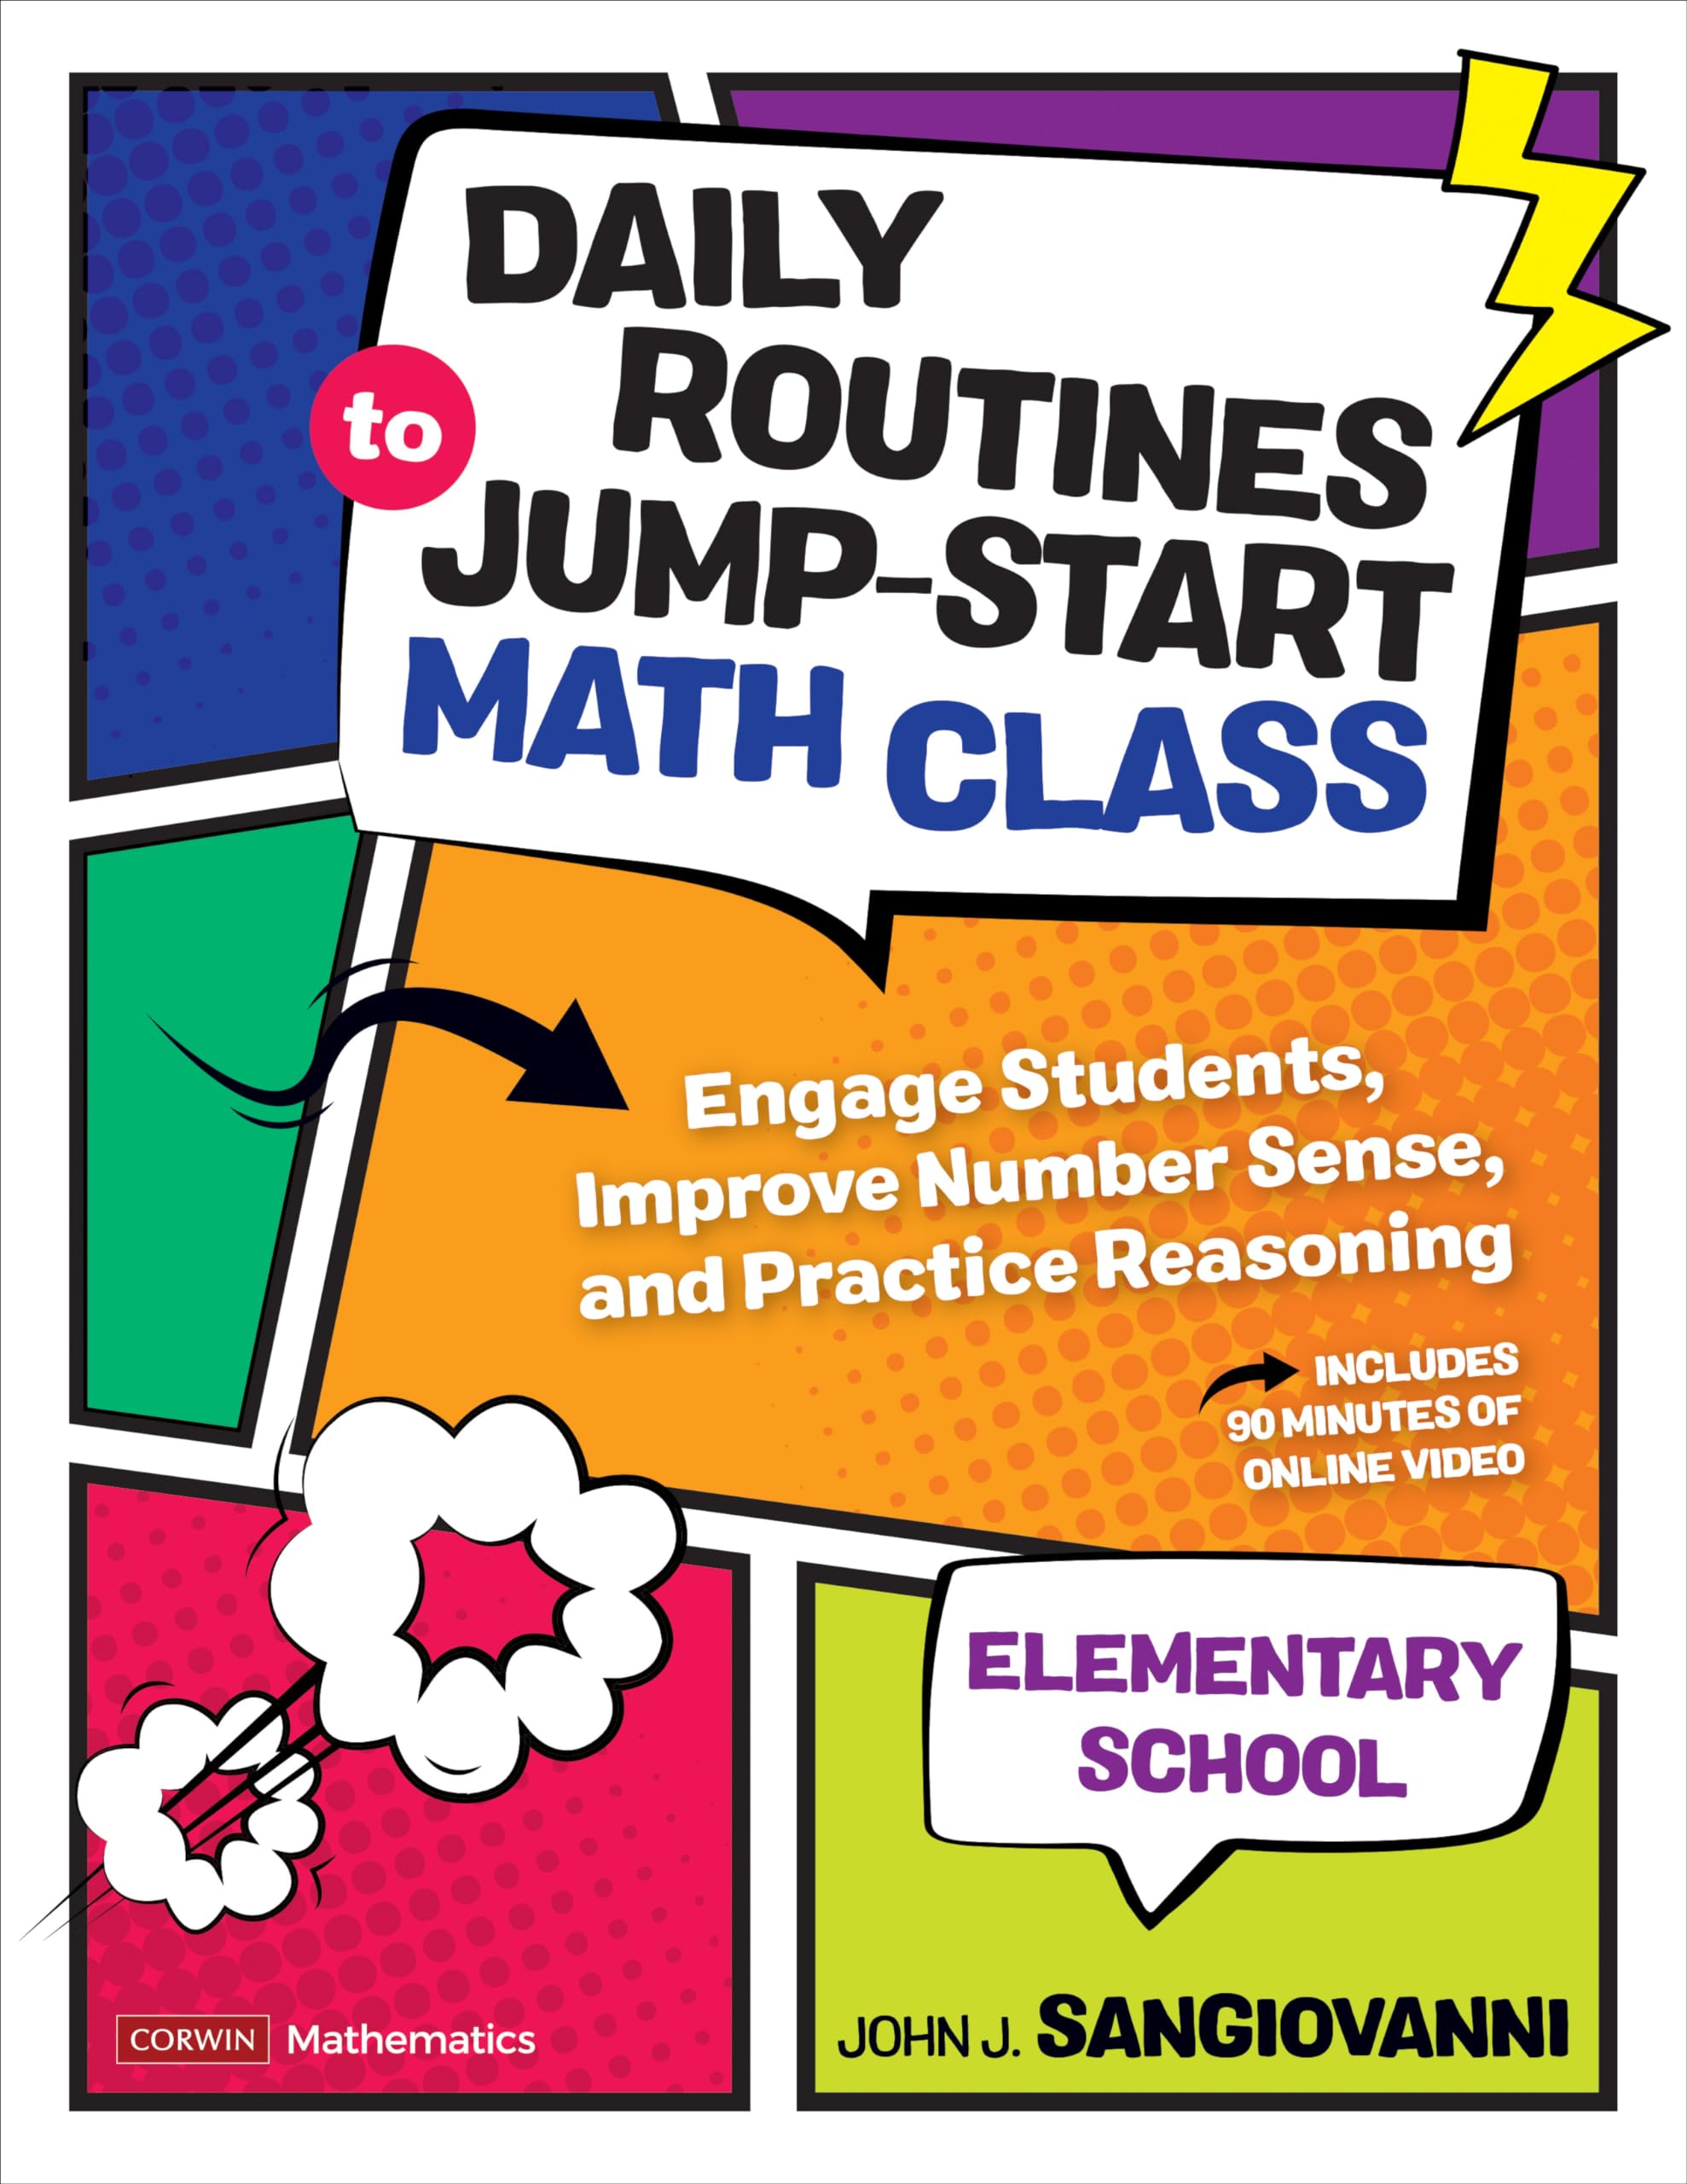 Daily Routines to Jump-Start Math Class, Elementary School: Engage Students, Improve Number Sense, and Practice Reasoning by Sangiovanni, John J.